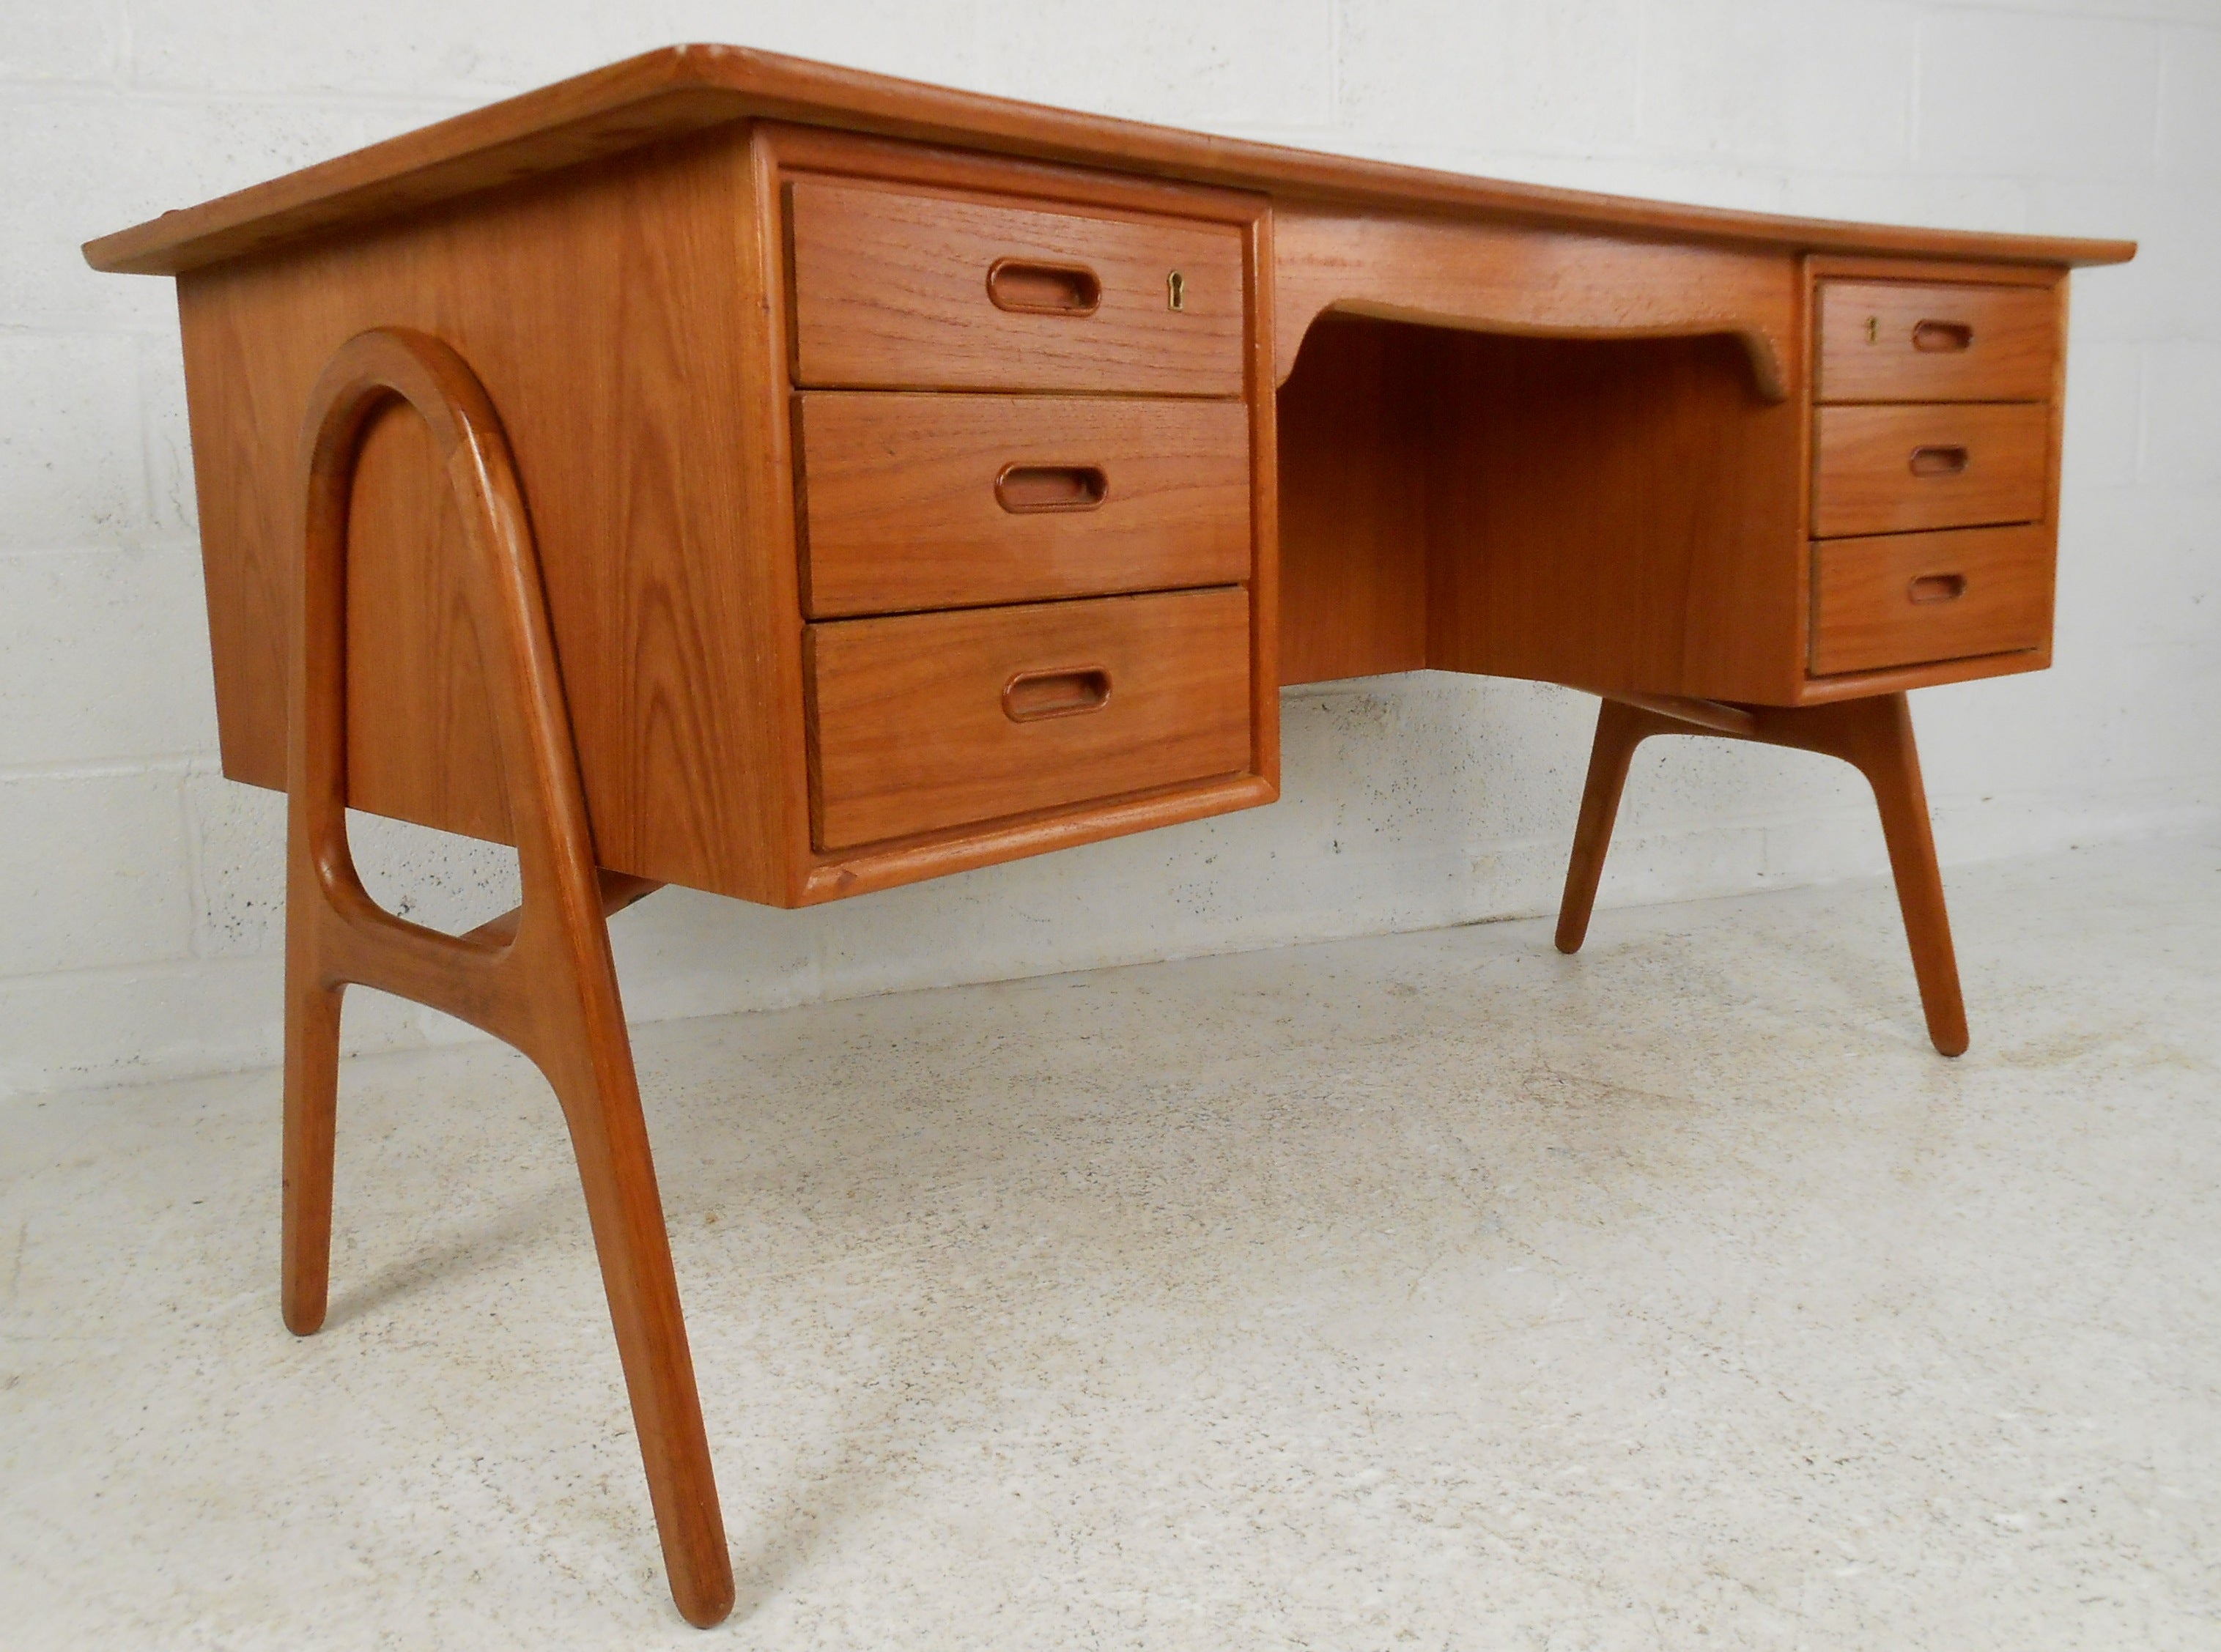 Writing Desk by Svend Aage Madsen